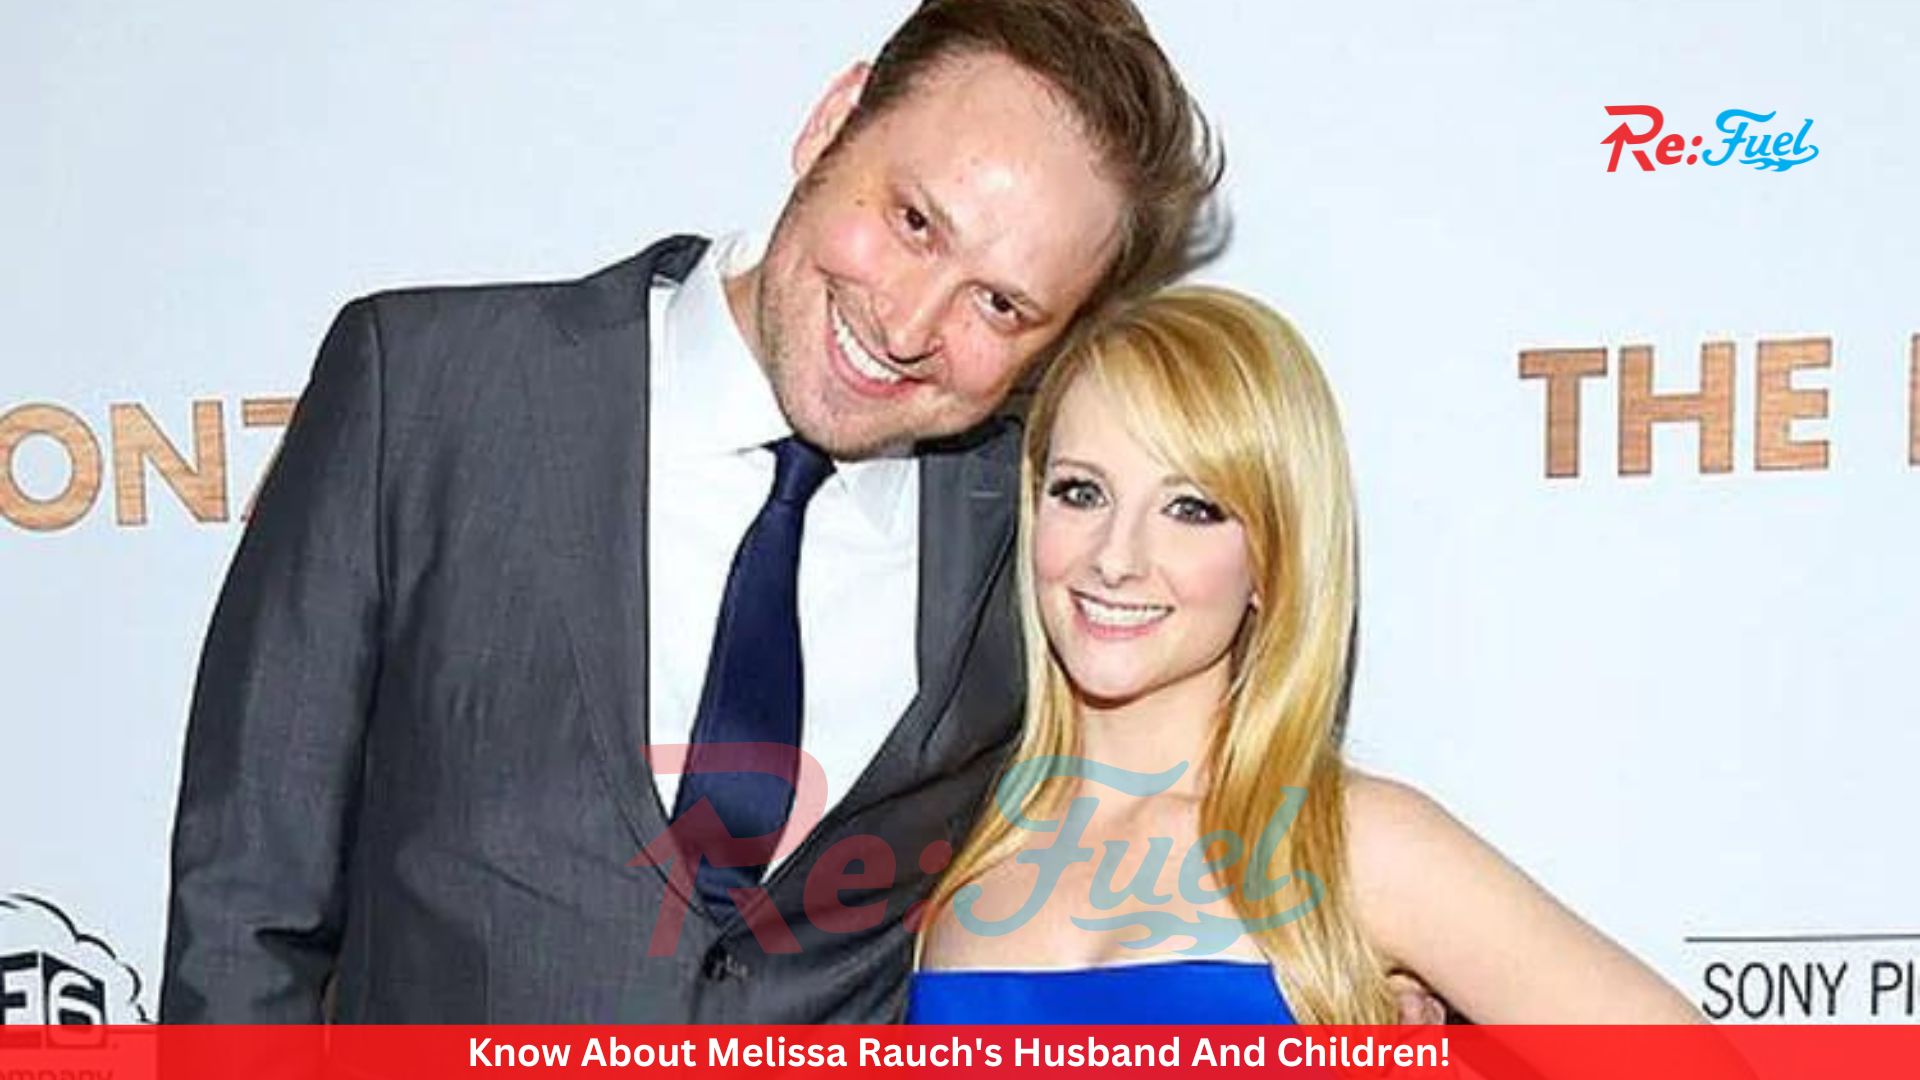 Know About Melissa Rauch's Husband And Children!